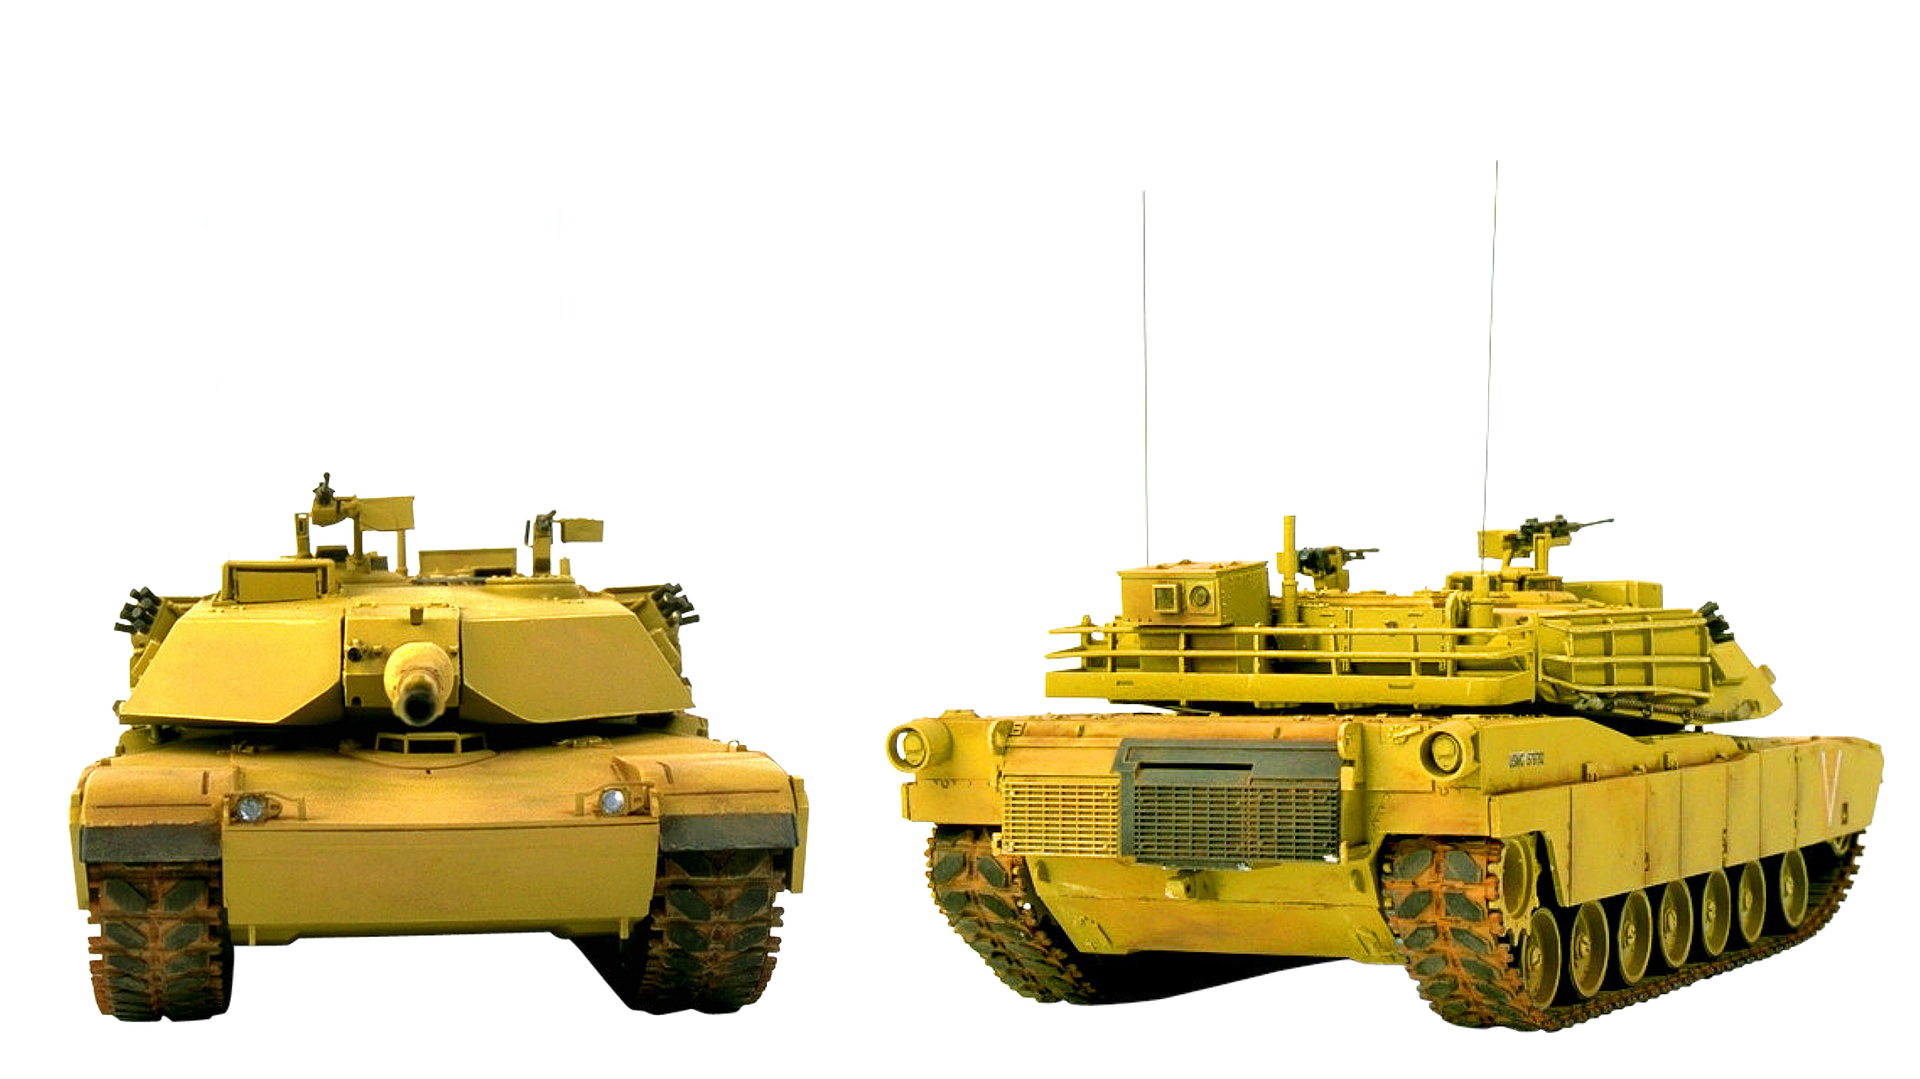 Two Yellow Tanks On A Black Background